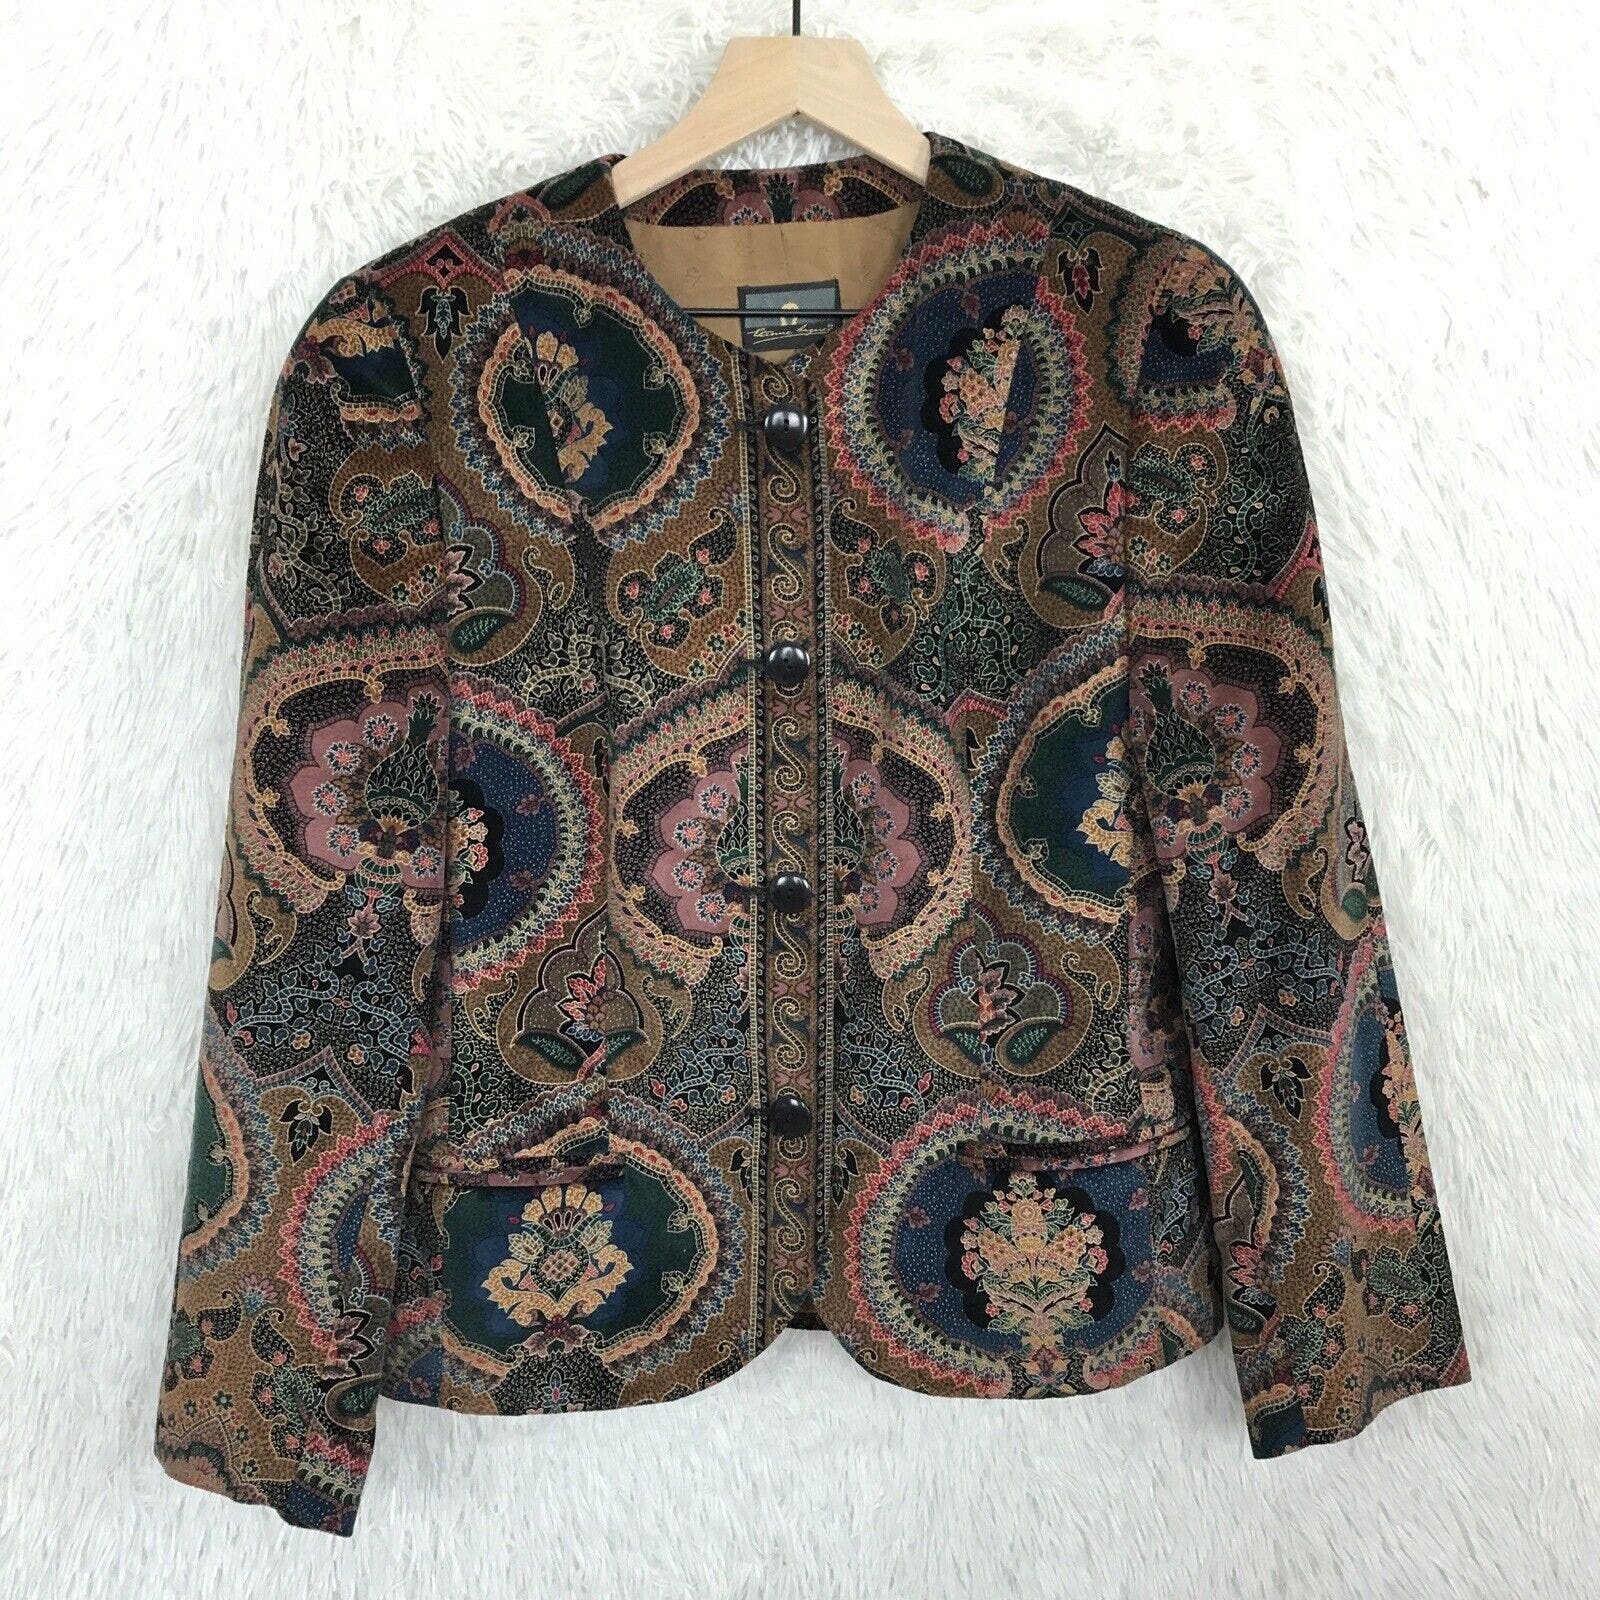 Primary image for Etienne Aigner Tapestry Coat Cotton Suede VTG West Germany Womens UK 14